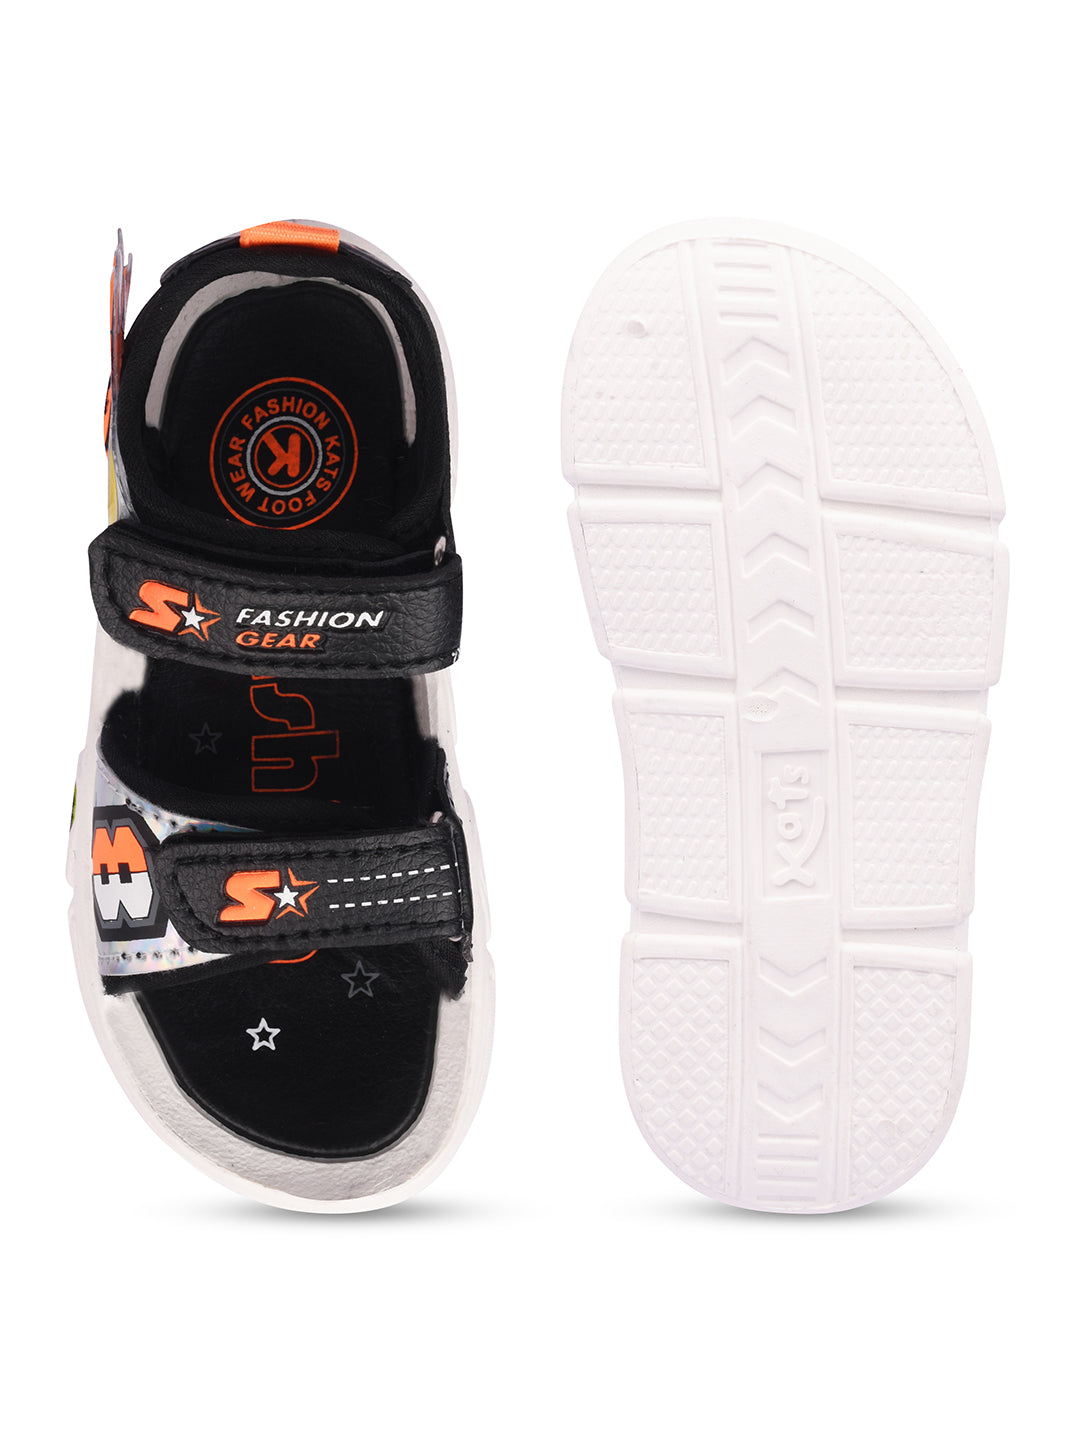 Kats F-20 Kids Baby Boys and Baby Girls Sandals (1 Years to 5 Years)